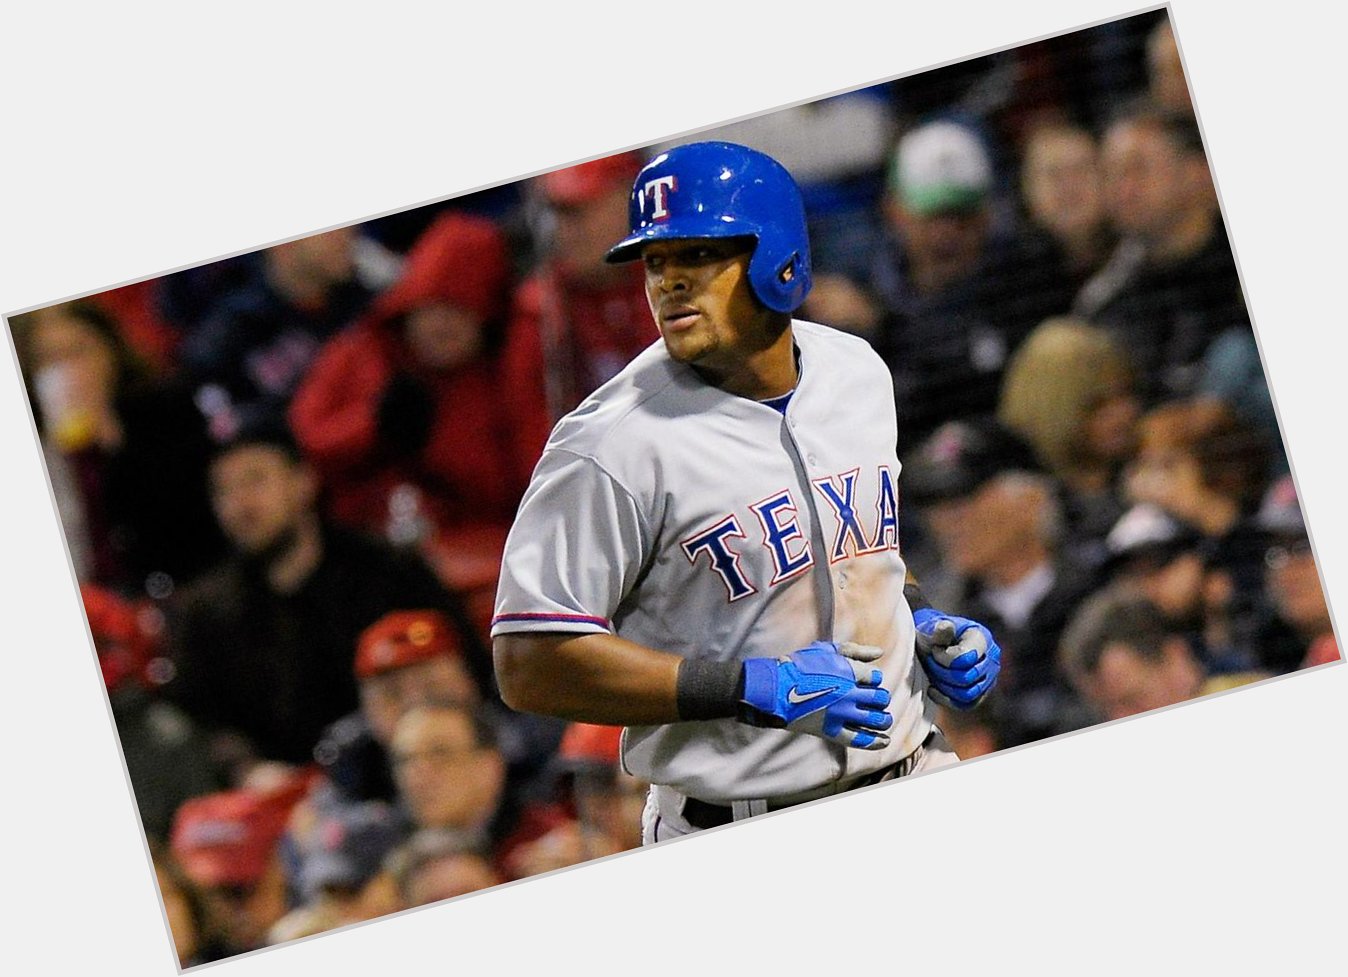 Happy Birthday, Adrian Beltre! And please, stay with the and ride this downturn out. 2016 should be better. 